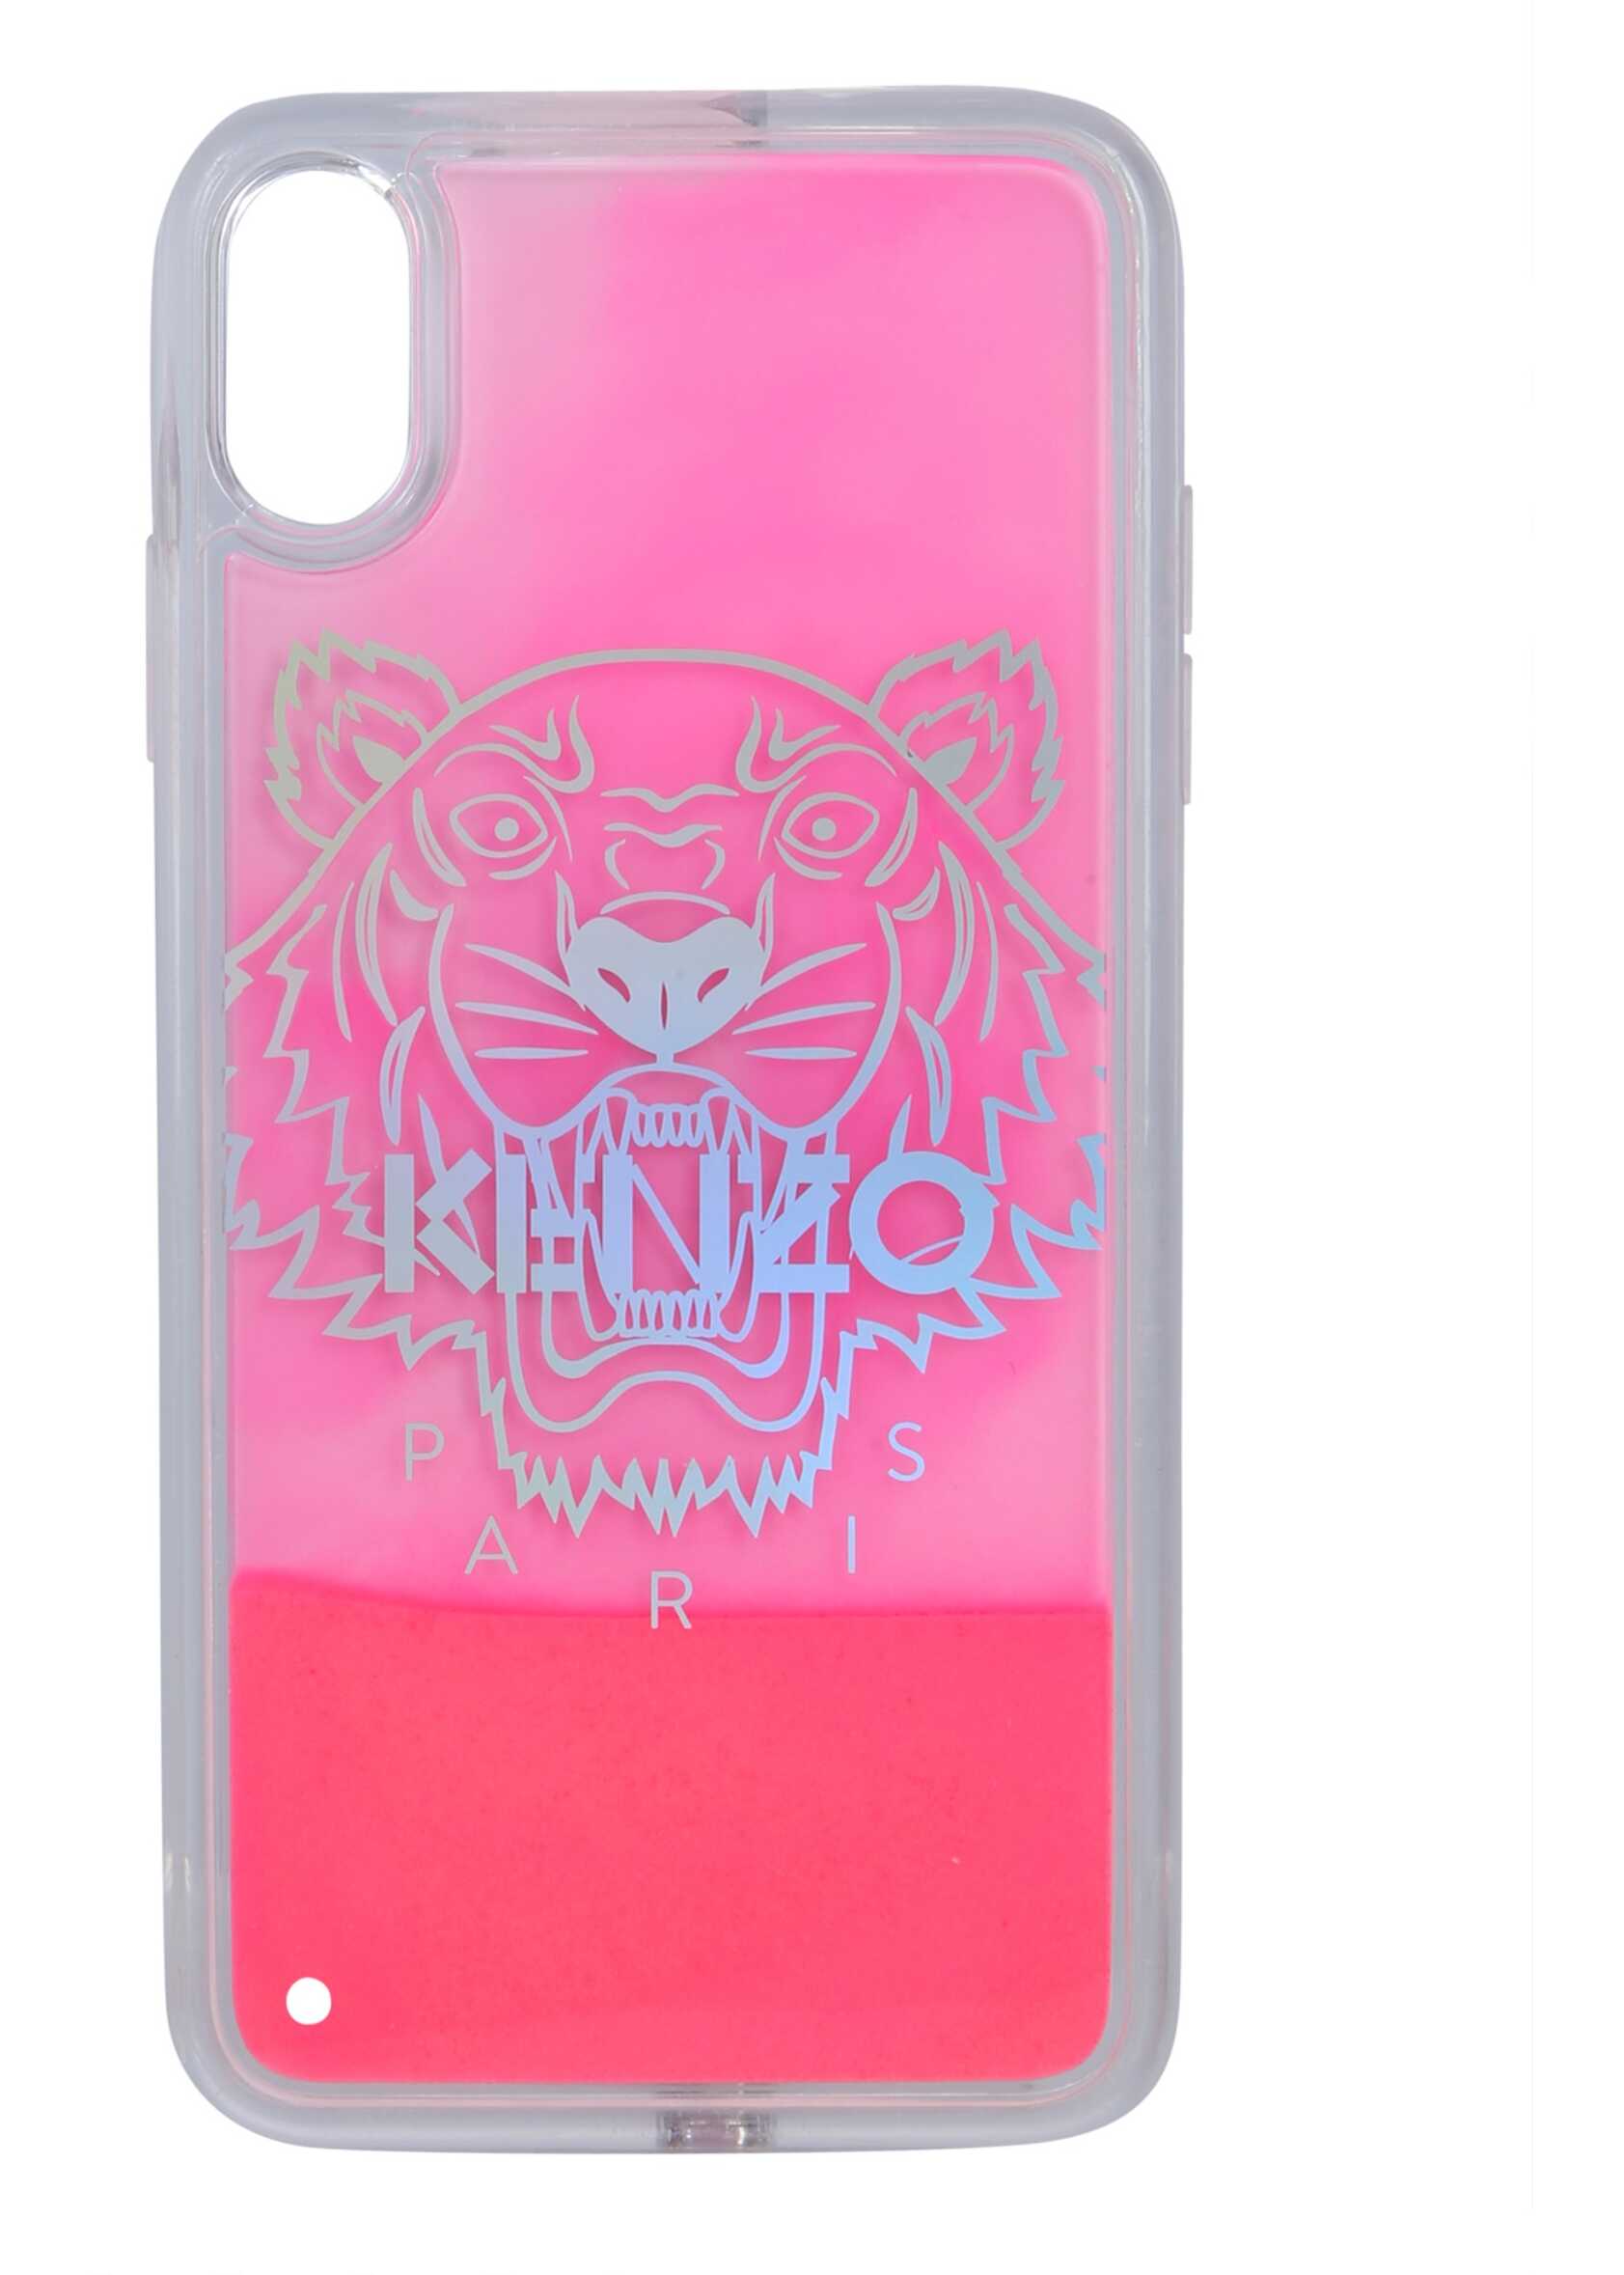 Kenzo Iphone Xs Max Cover RED image11